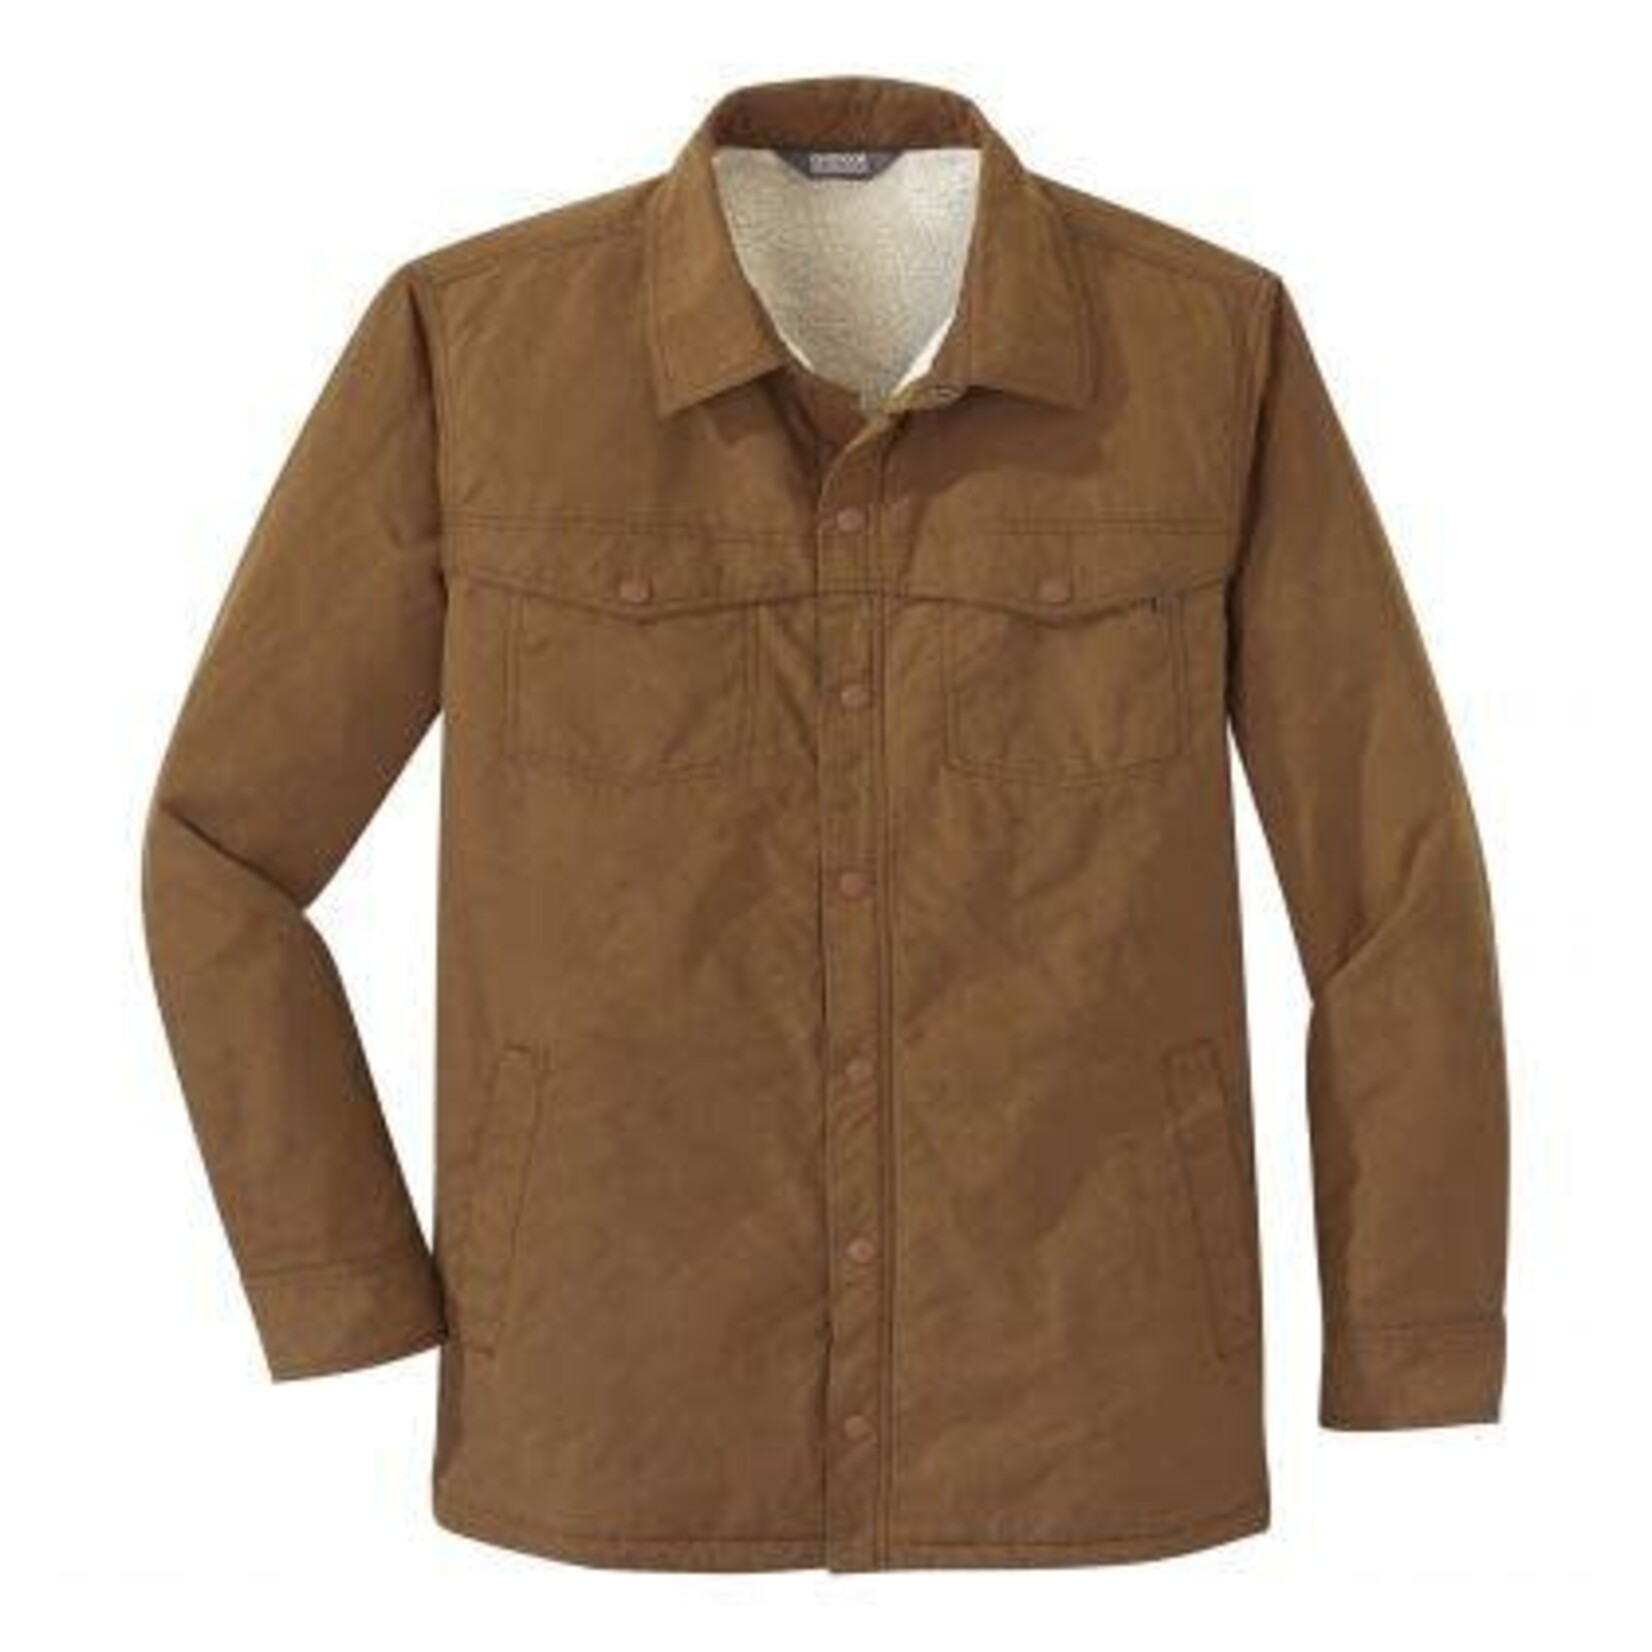 Outdoor Research Chemise isolée Wilson Shirt Jacket pour hommes